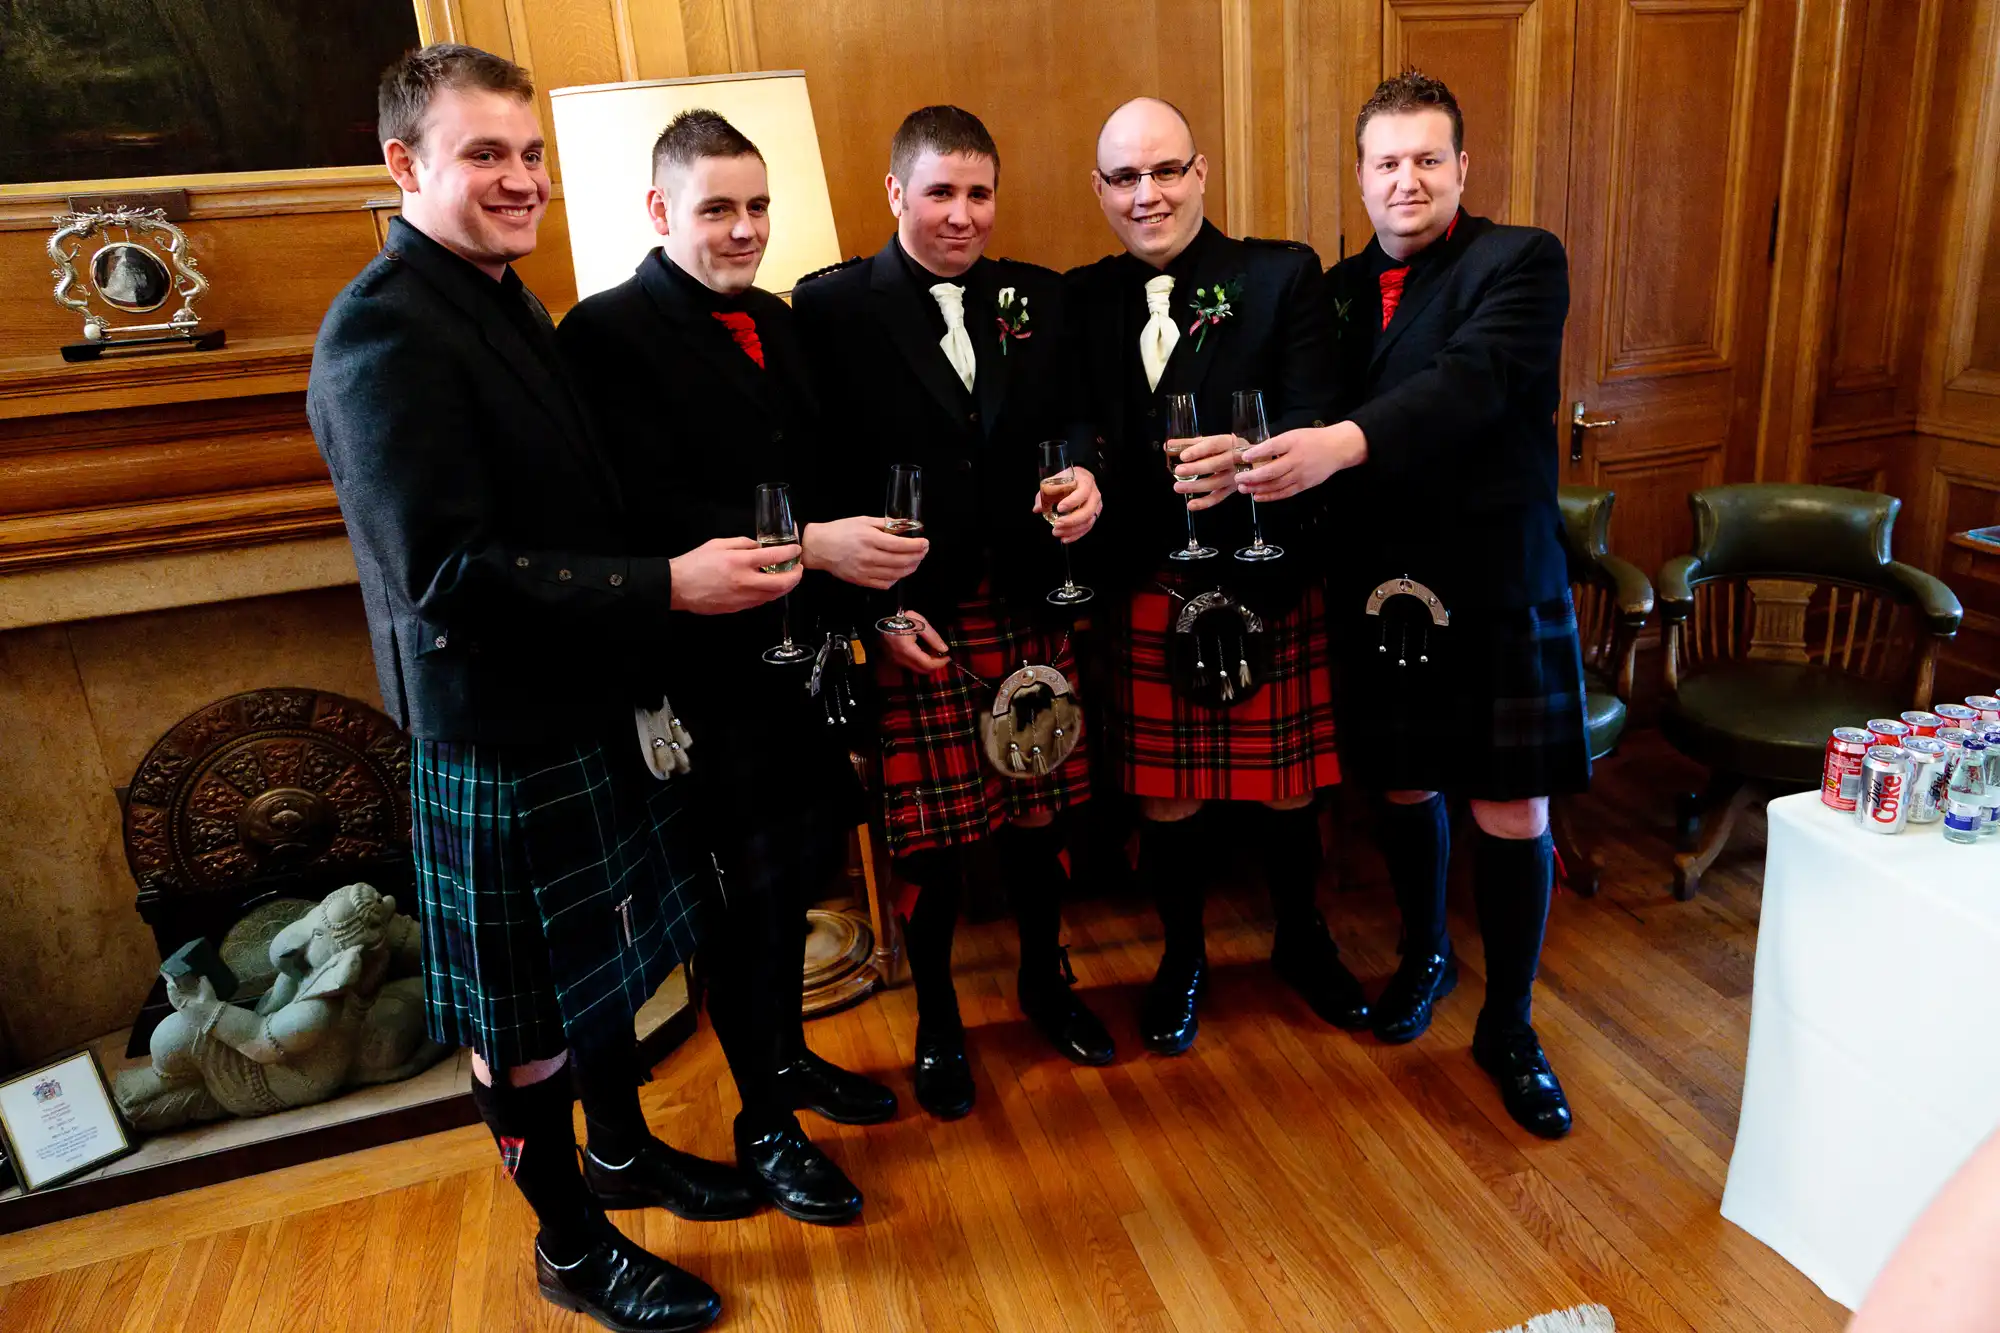 Five men in traditional scottish kilts and jackets, holding champagne glasses and smiling at a formal indoor event.